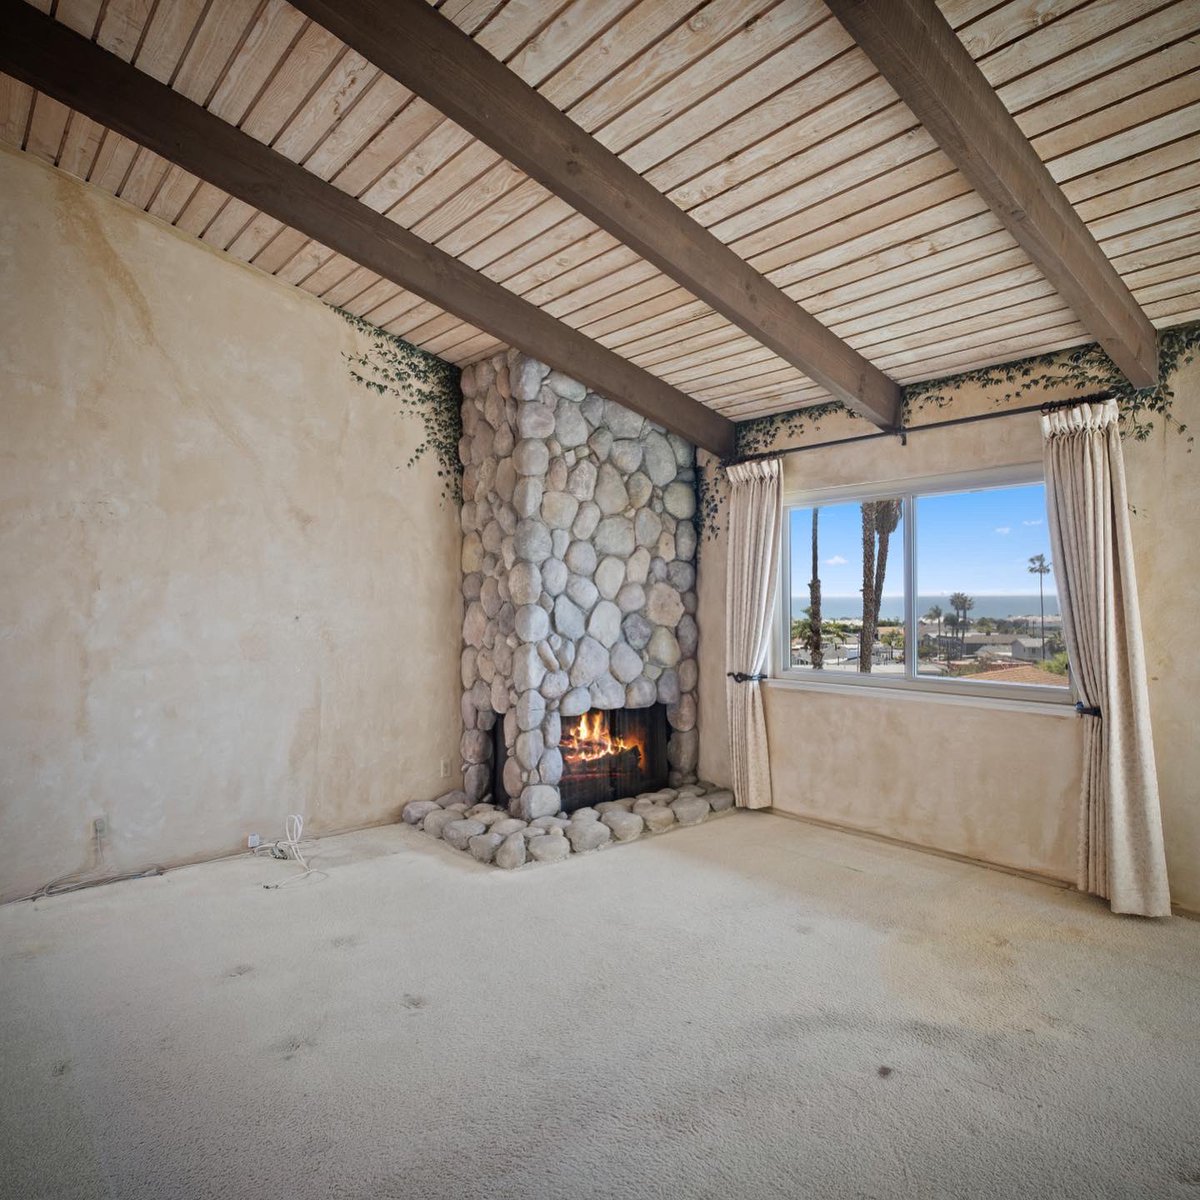 NEW PRICE | 📍33901 MARIANA DR, DANA POINT

Call us to book a private tour at 949-922-9552⁣⁣⁣
⁣⁣⁣livelrealestate.com⁣⁣⁣⁣⁣⁣⁣

#33901Mariana #newprice #danapoint #location #livingroom #realestate #summer #lagunabeach #oceanviews